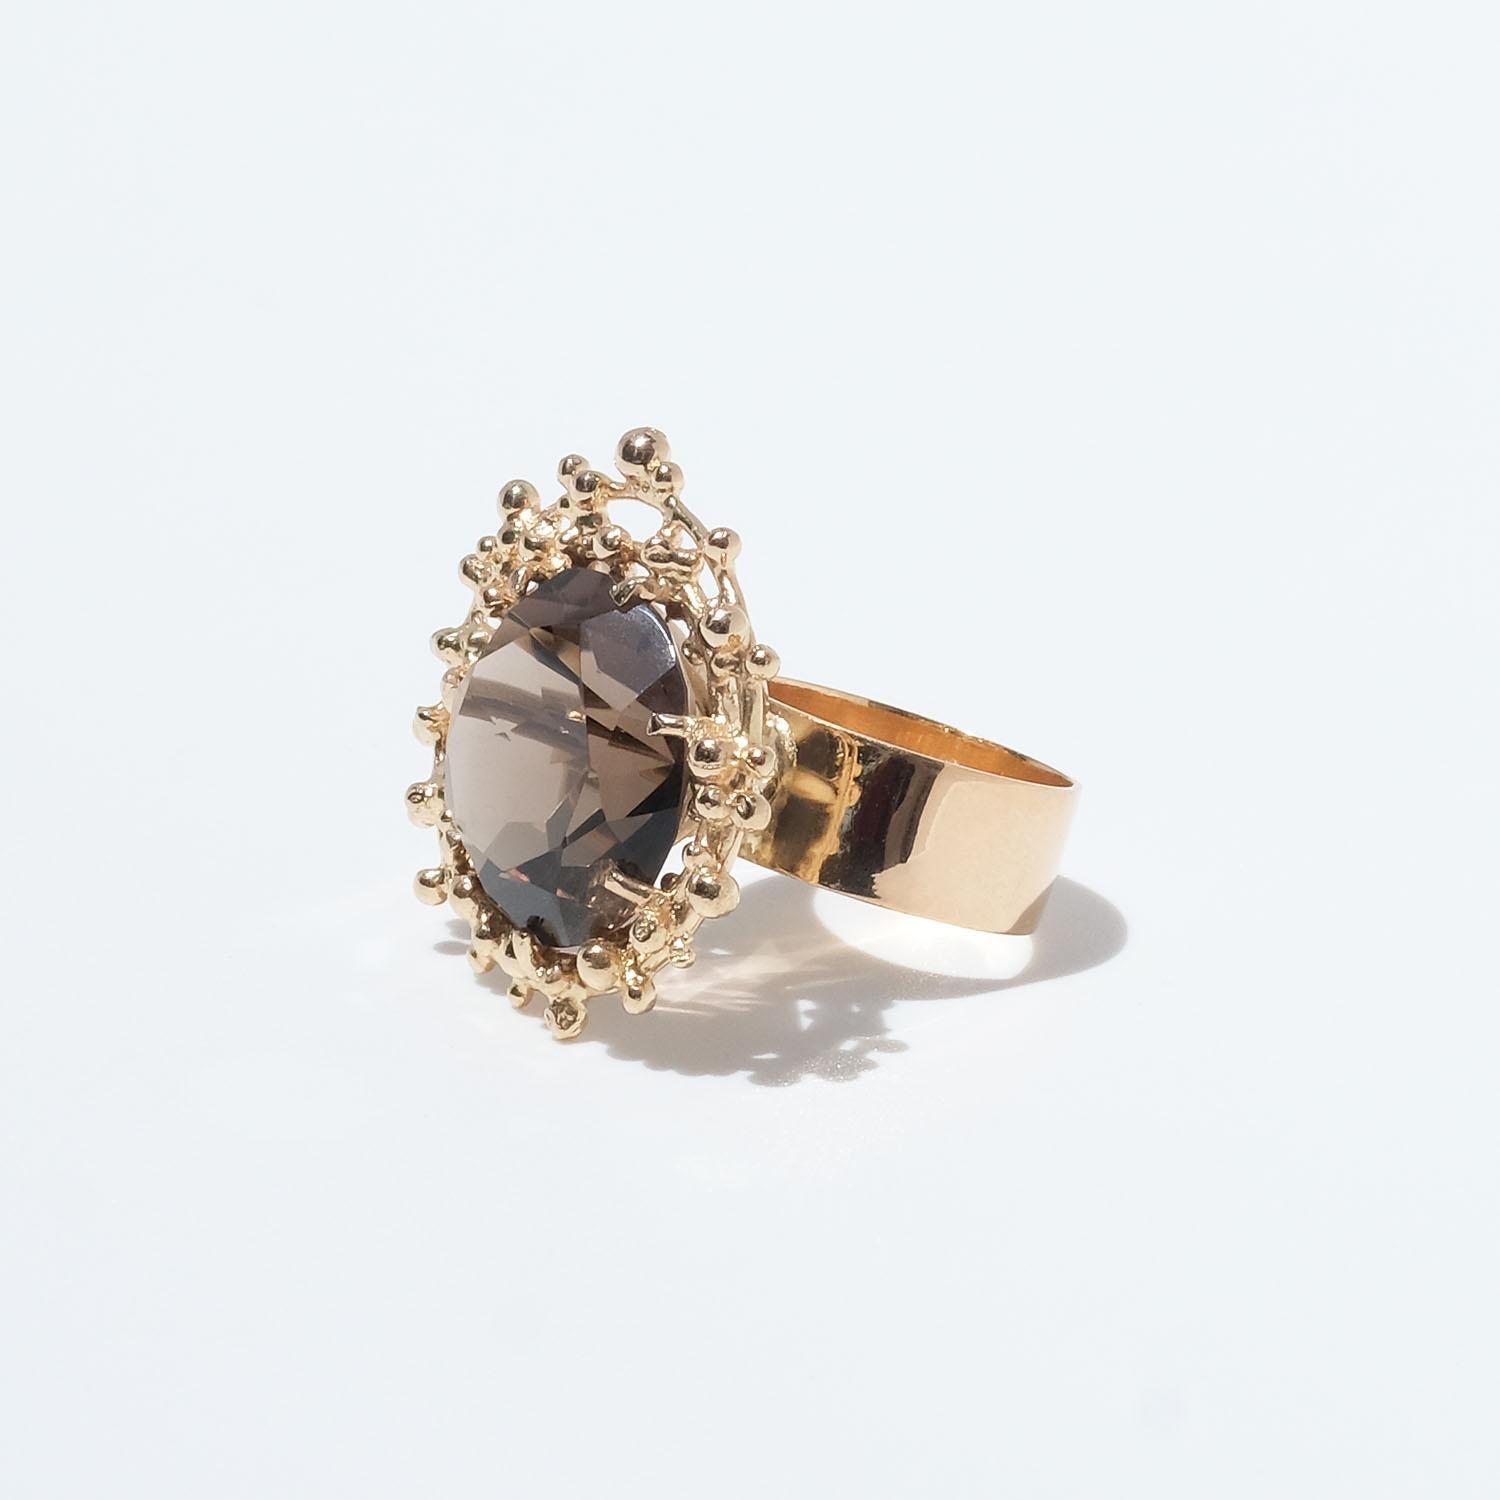 Women's or Men's 18k Gold and Smoky Quartz Ring by Swedish Master Peter Von Post, Made Year 1972